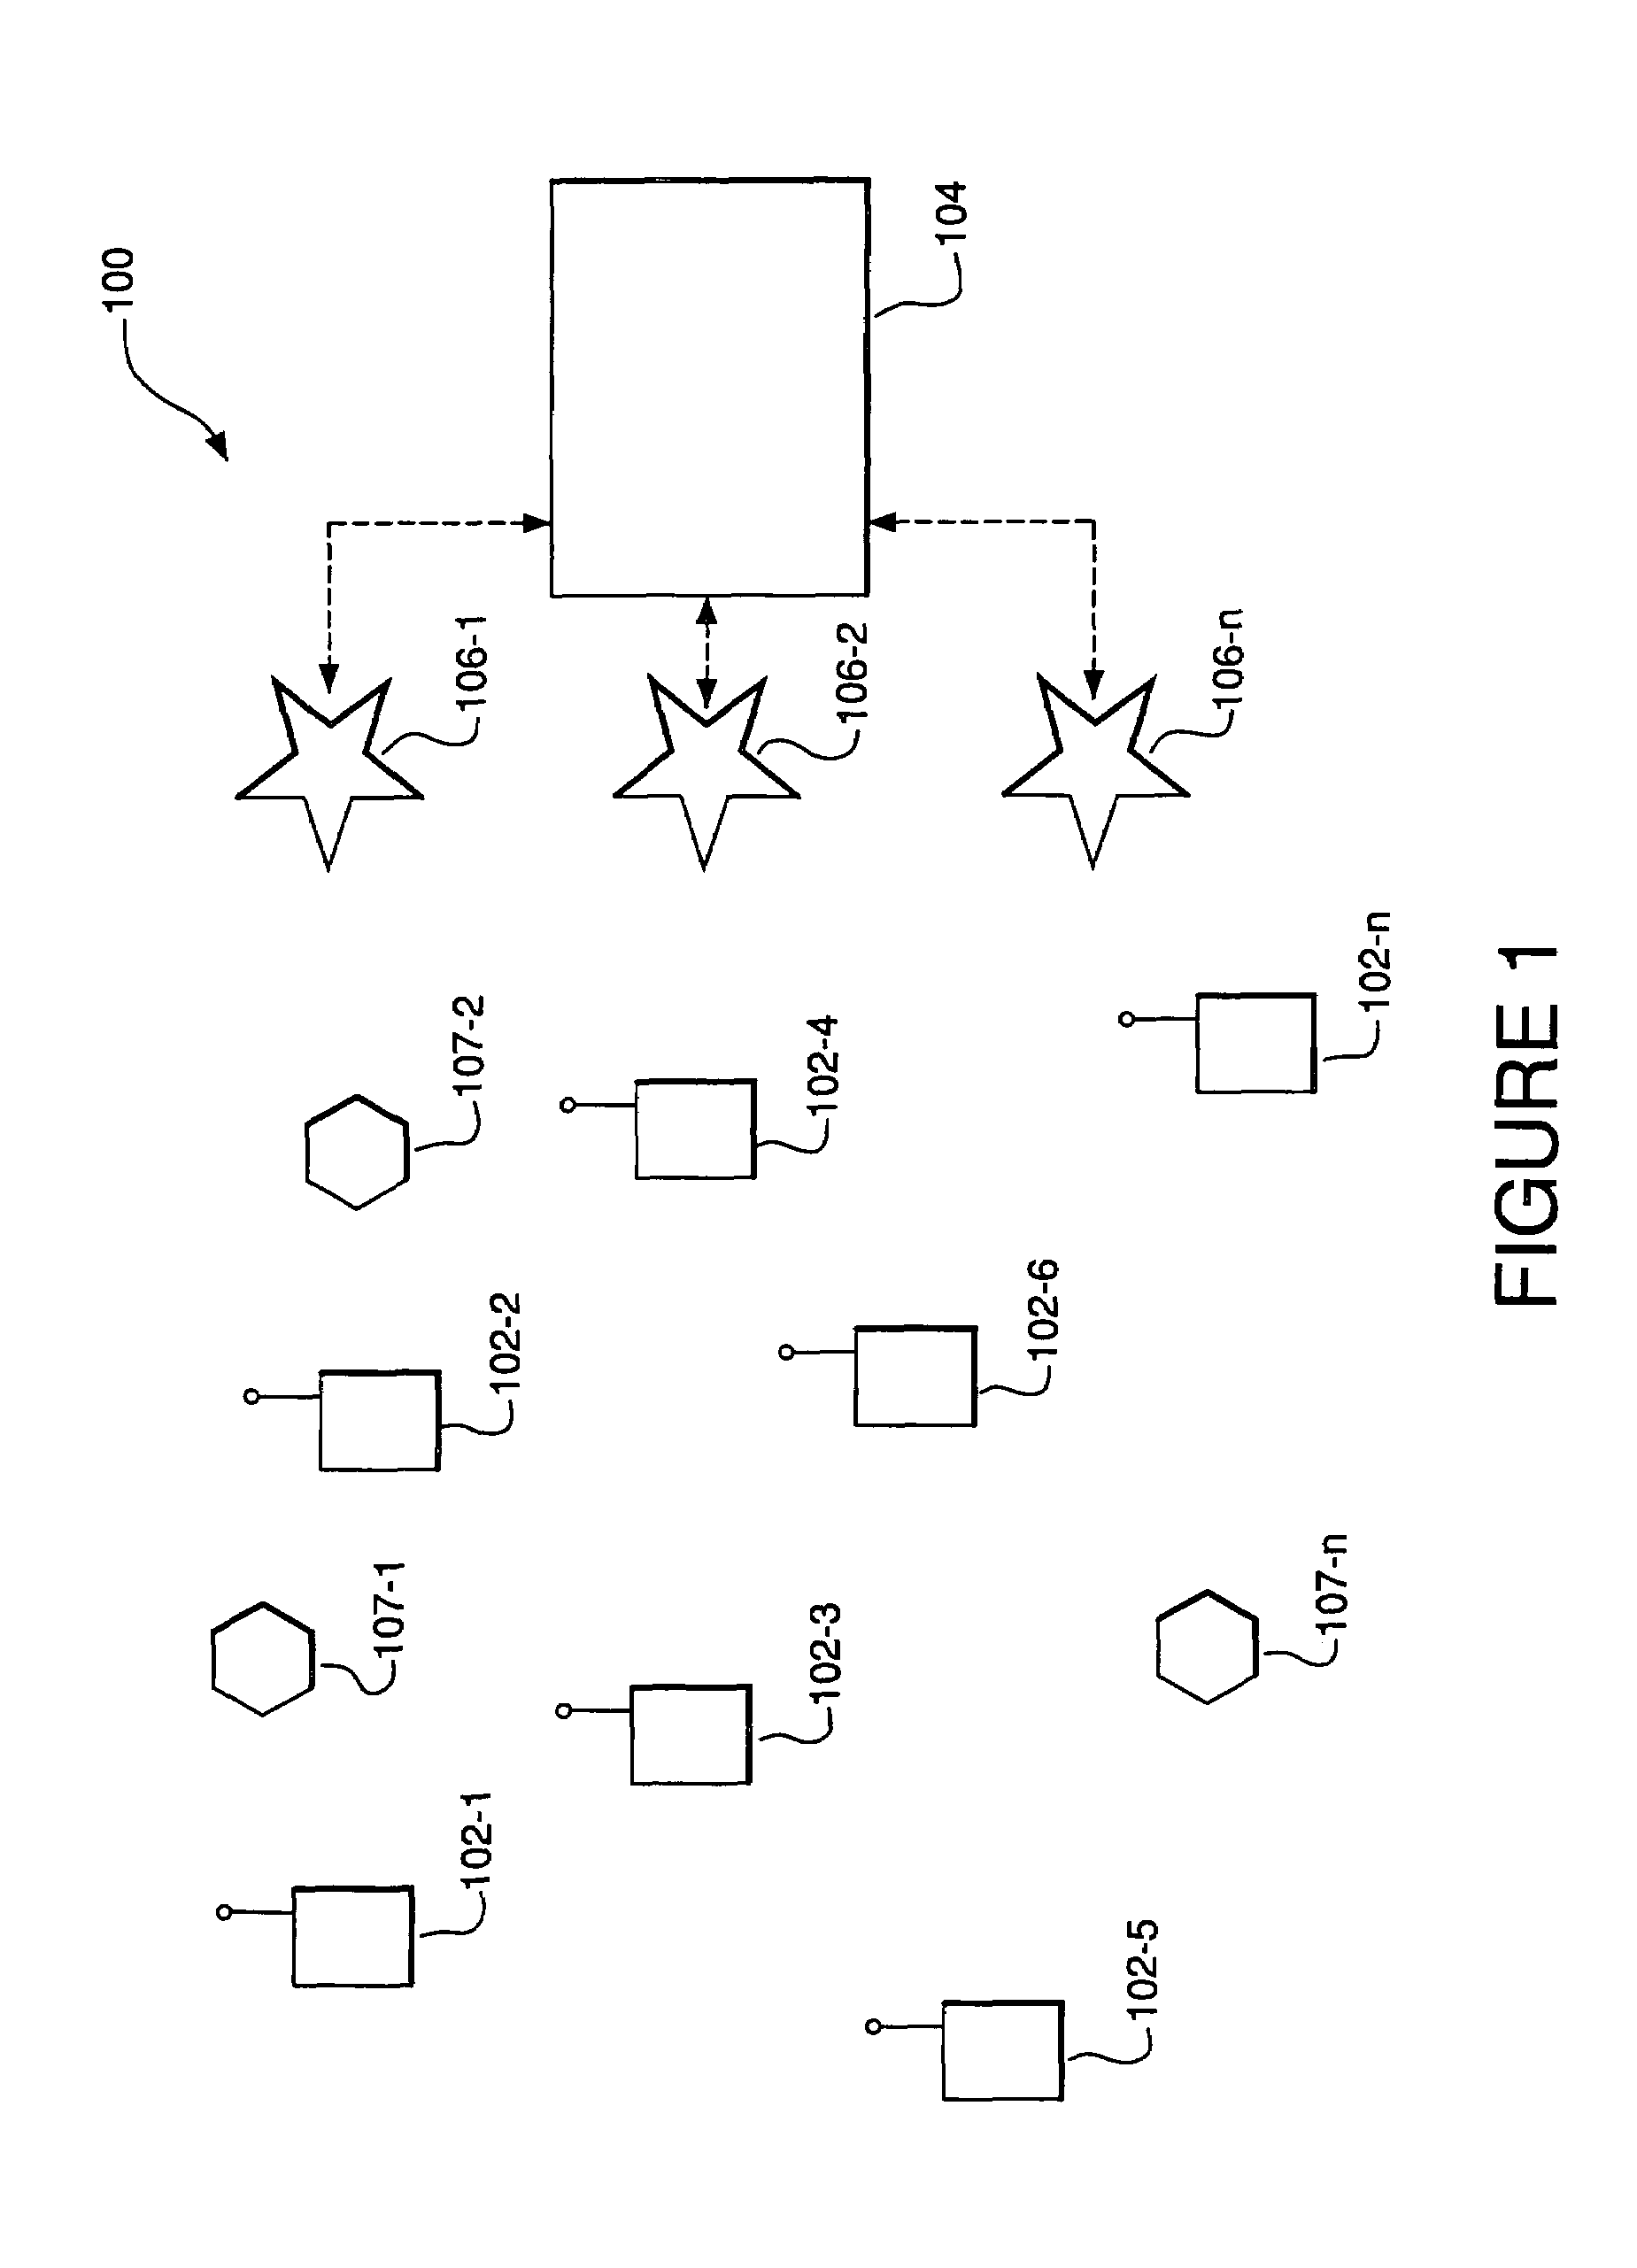 System and method for improving the accuracy of time of arrival measurements in a wireless ad-hoc communications network